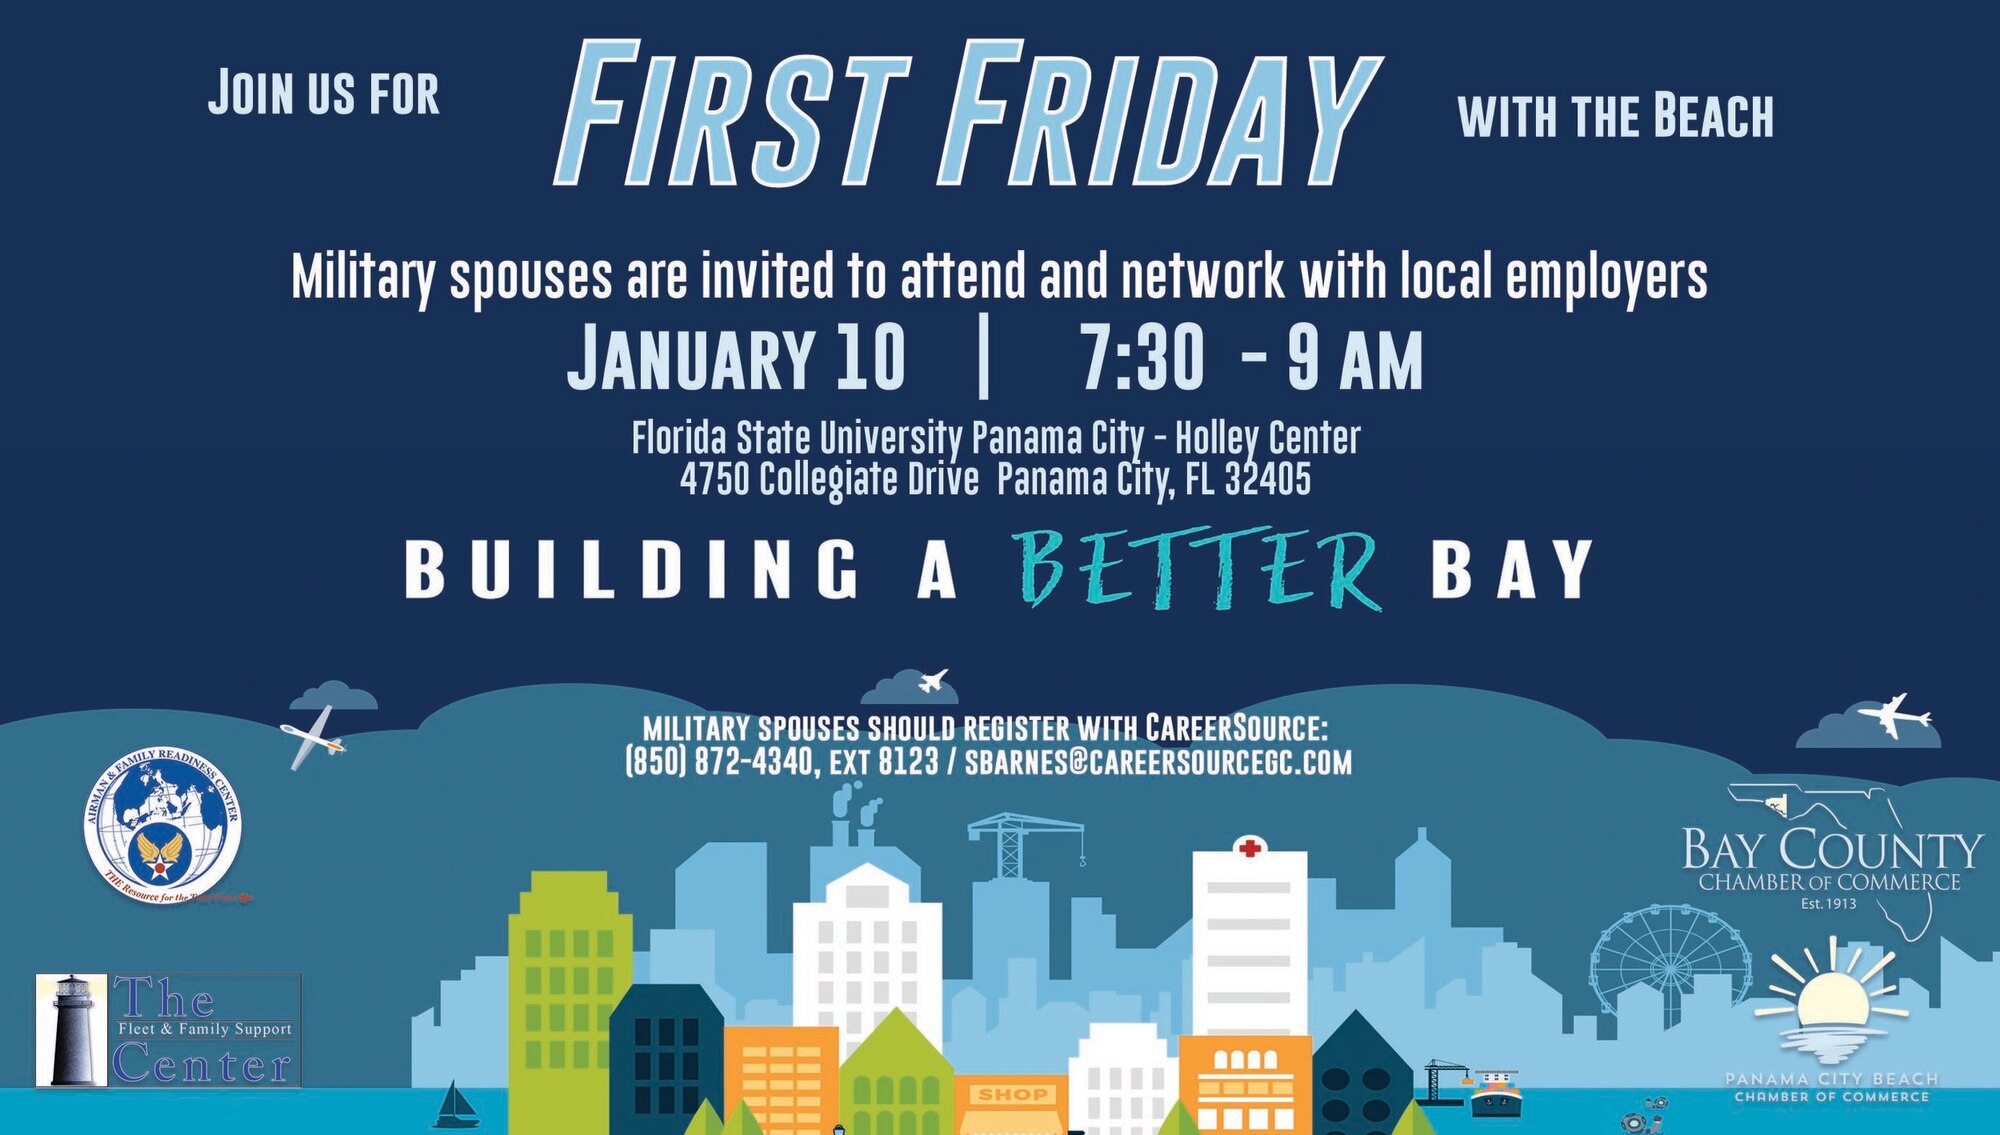 Organizations affiliated with Tyndall Air Force Base partnered with the Bay County Chamber of Commerce and the Panama City Beach Chamber of Commerce to host a First Friday event held at Florida State University Holley Center, Panama City, Florida, Jan. 10, 2020. (Courtesy graphic)